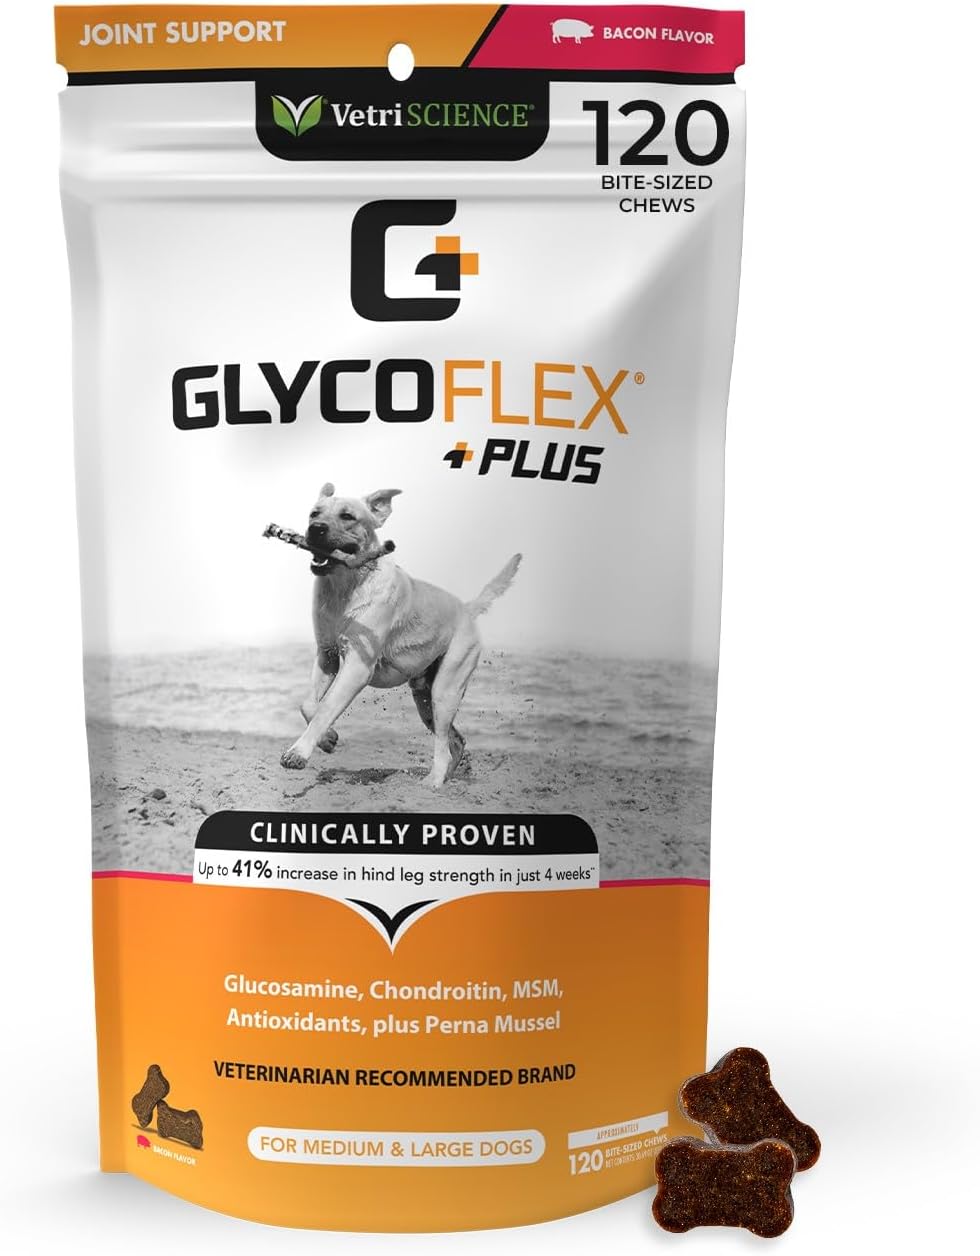 VetriScience GlycoFlex Plus Hip and Joint Supplement for Dogs – Extra-Strength Joint Support Chews with Green Lipped Mussel, Chondroitin, and Glucosamine for Dogs